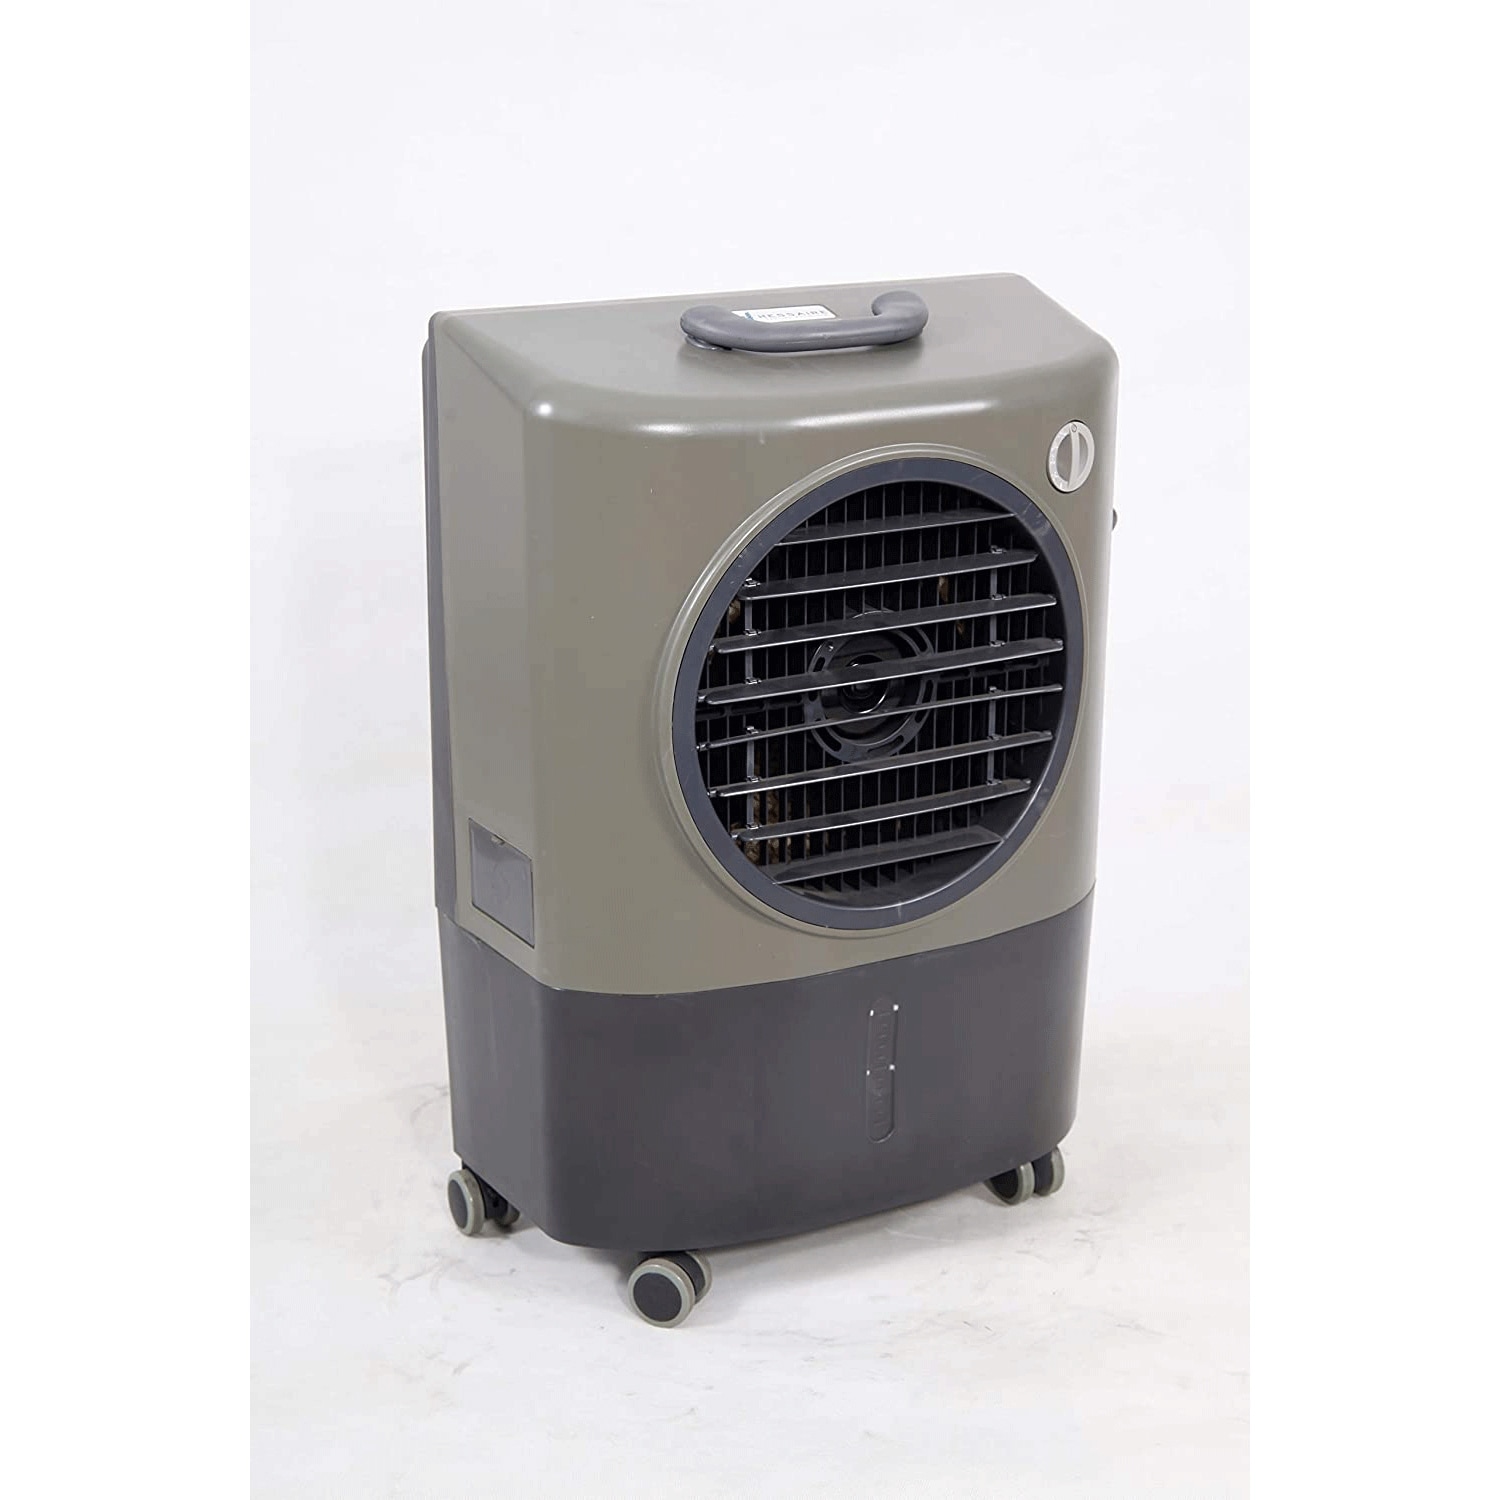 Hessaire MC18V Indoor/Outdoor Portable 500 Square Foot Evaporative Air Cooler - 16